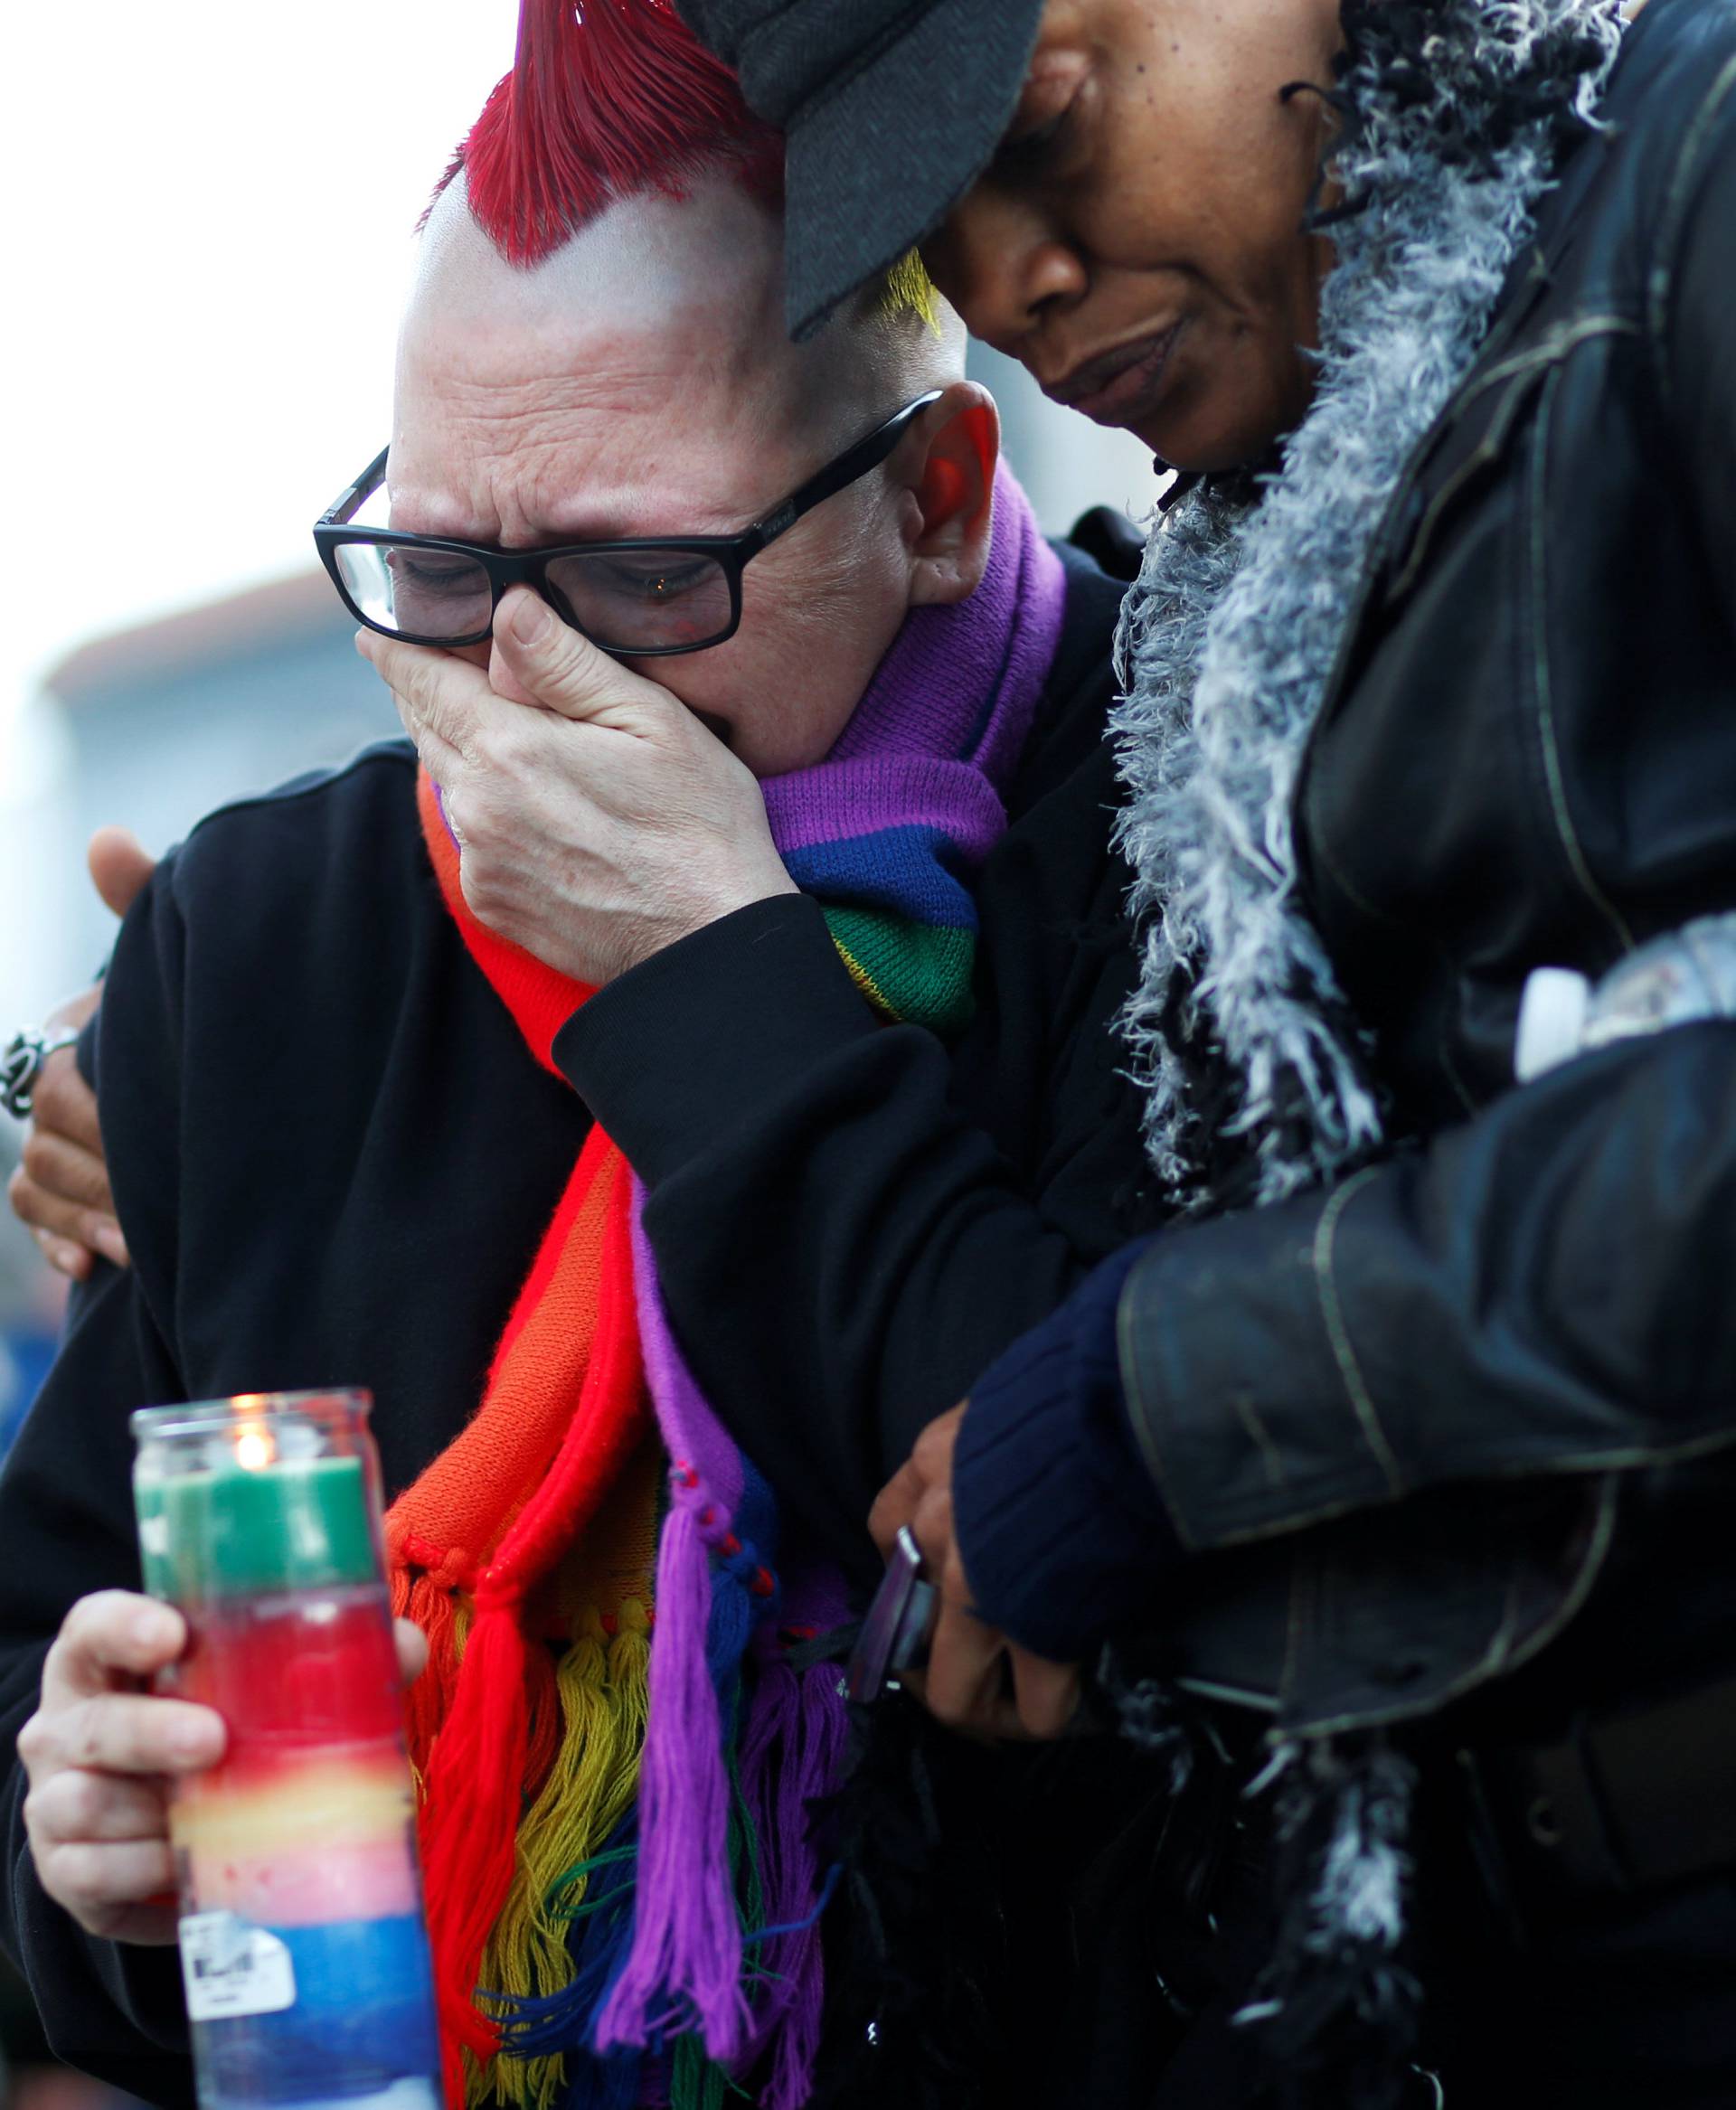 Trashina Cann and Vixen Noir, both of San Francisco, attend a candlelight vigil for the victims of the Orlando attack against a gay night club, held in San Francisco